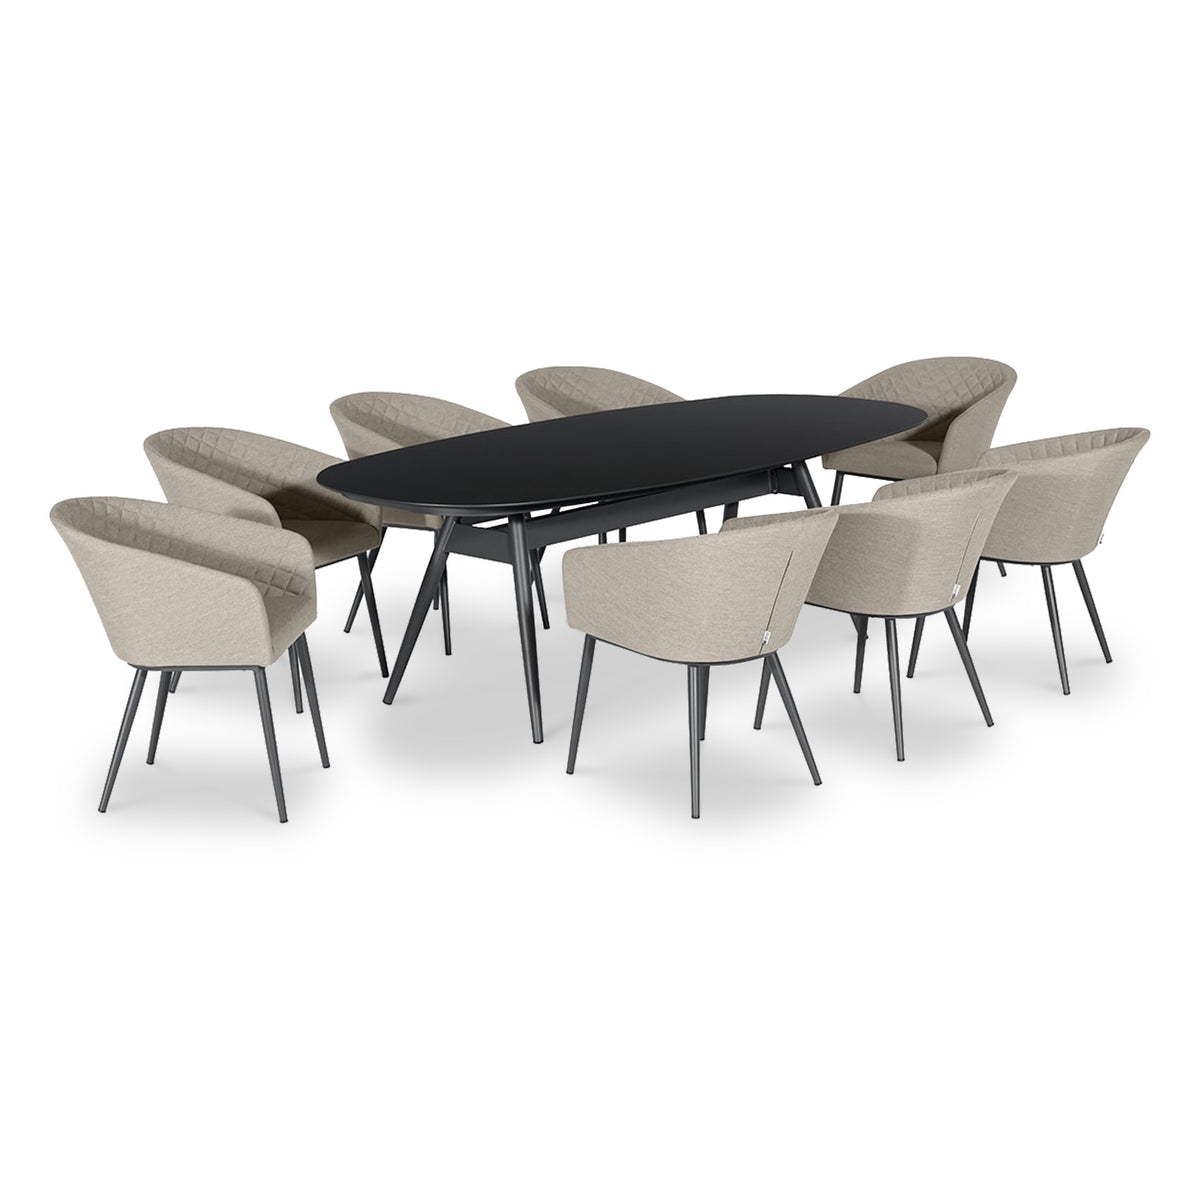 Maze Ambition 8 Seat Oval Dining Set from Roseland Furniture